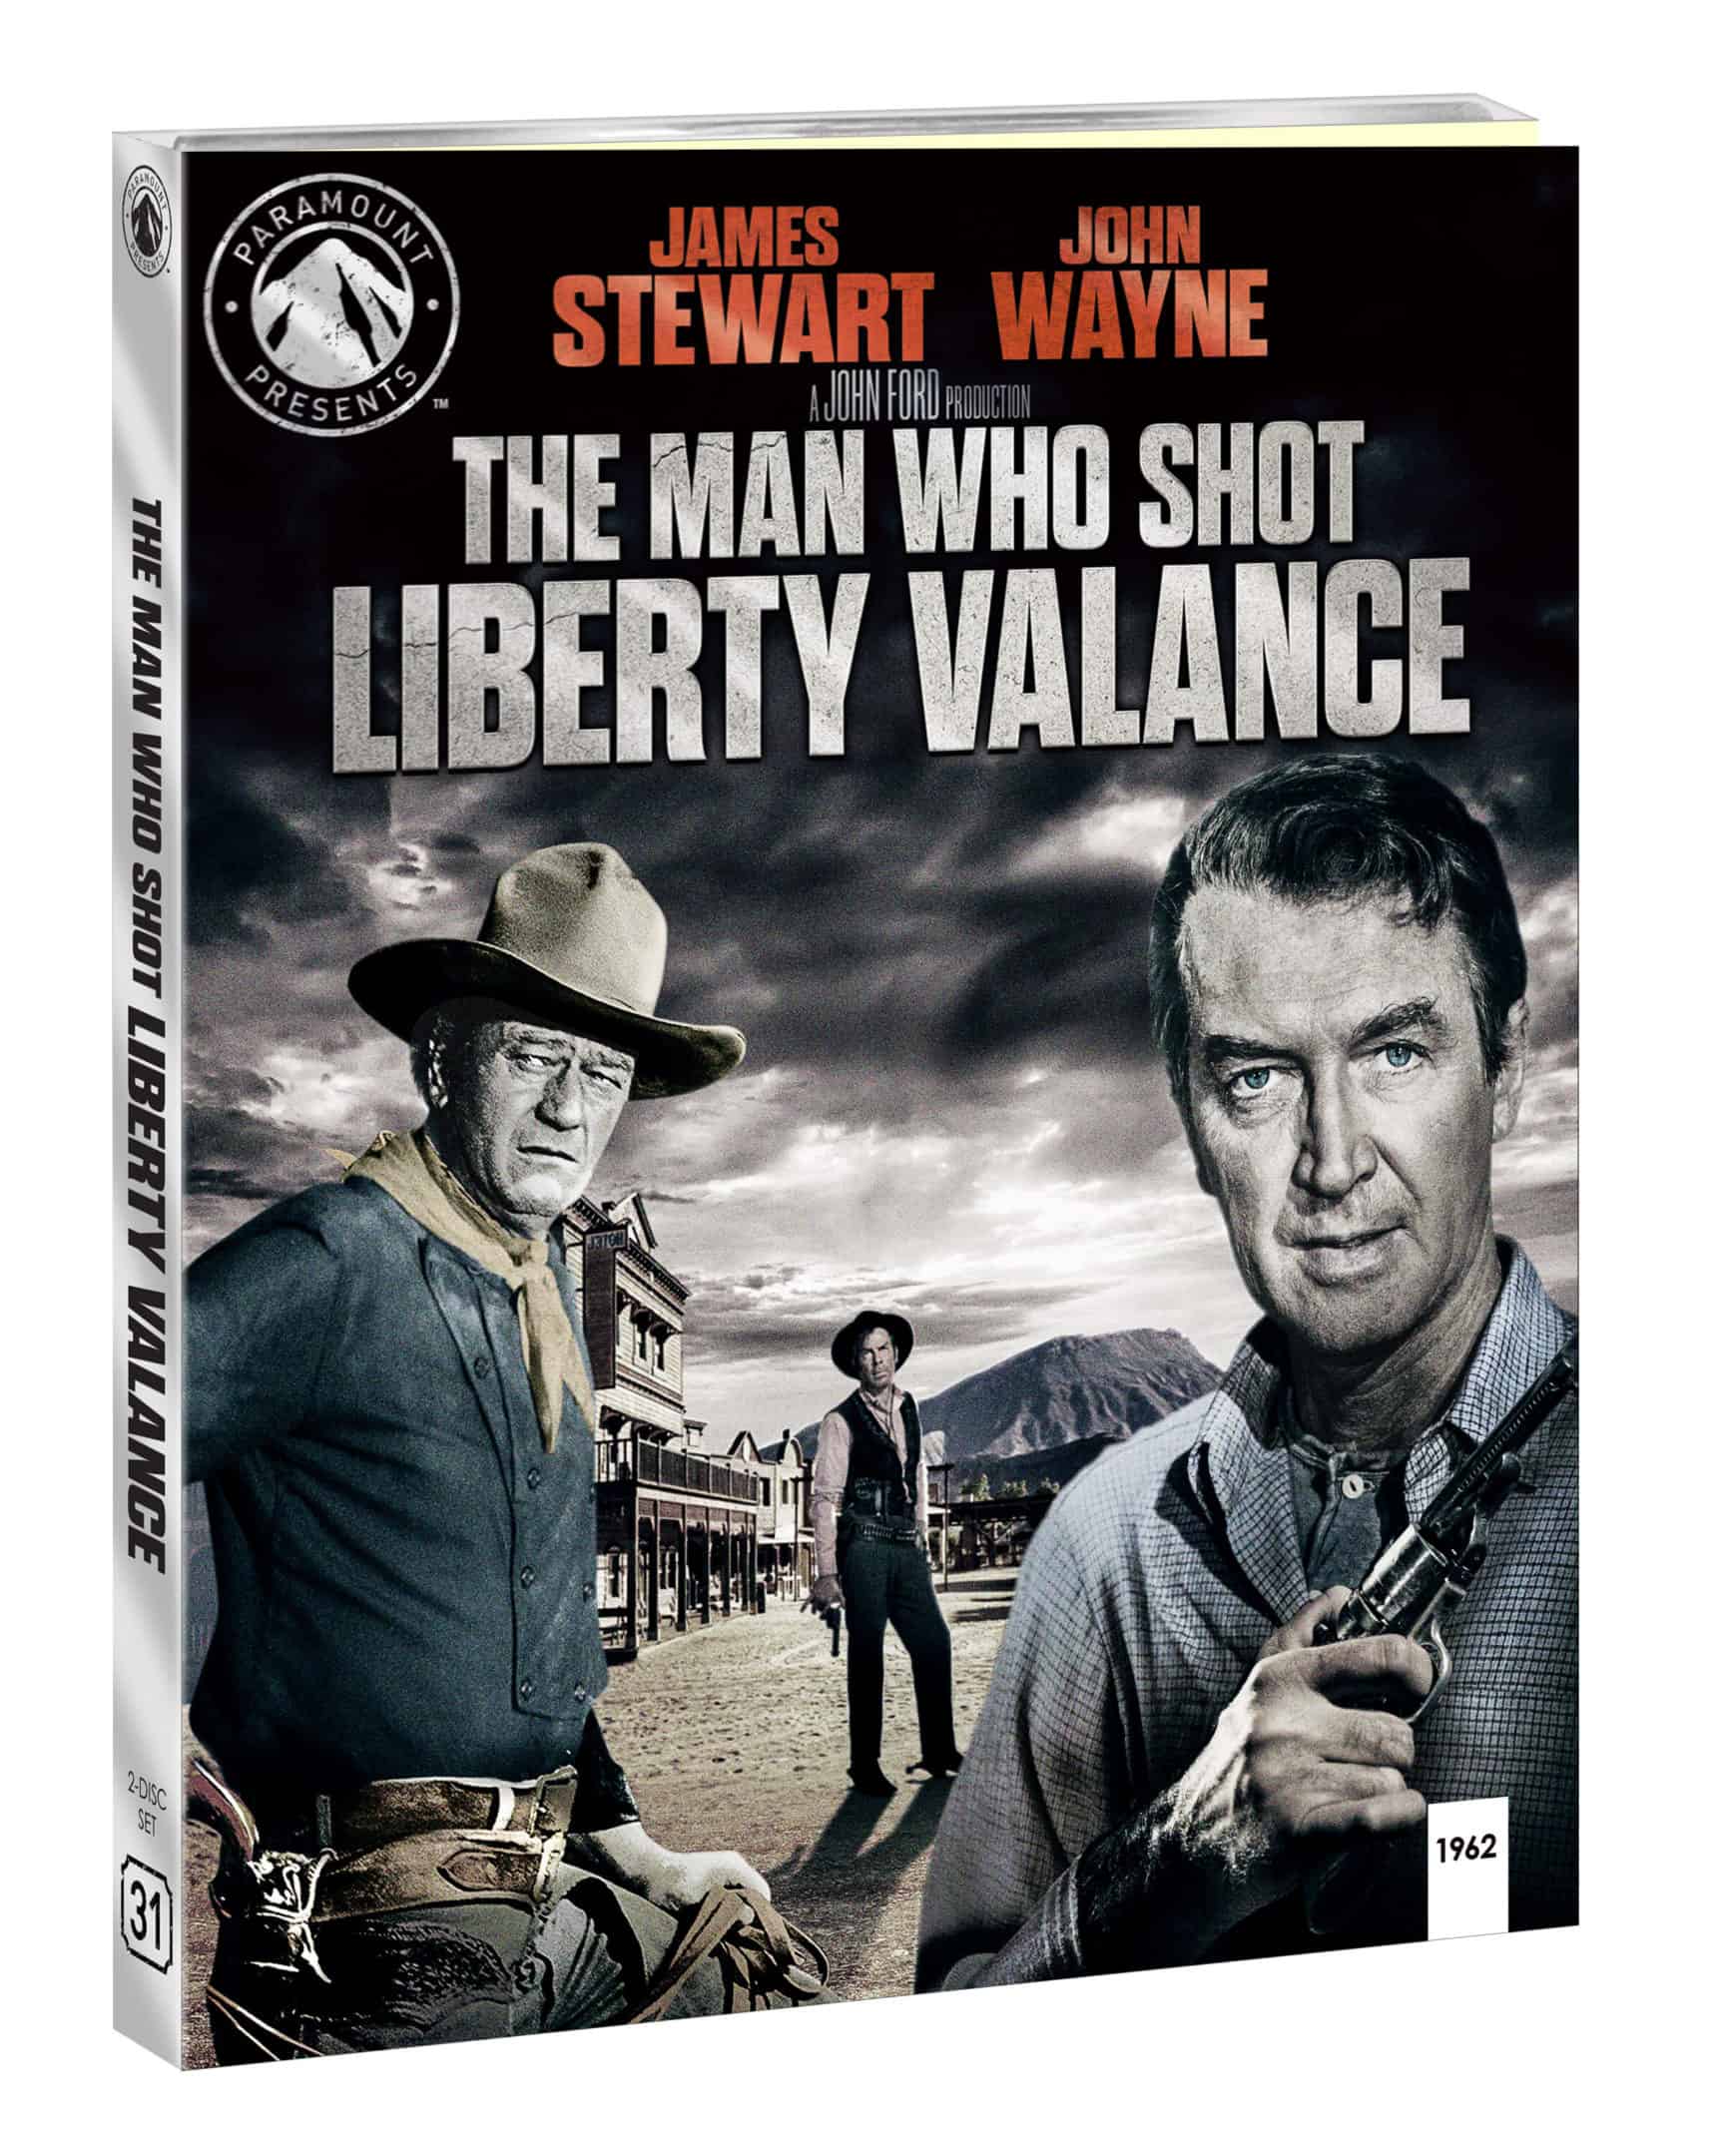 The Man Who Shot Liberty Valence comes to 4K UHD on May 17th 18